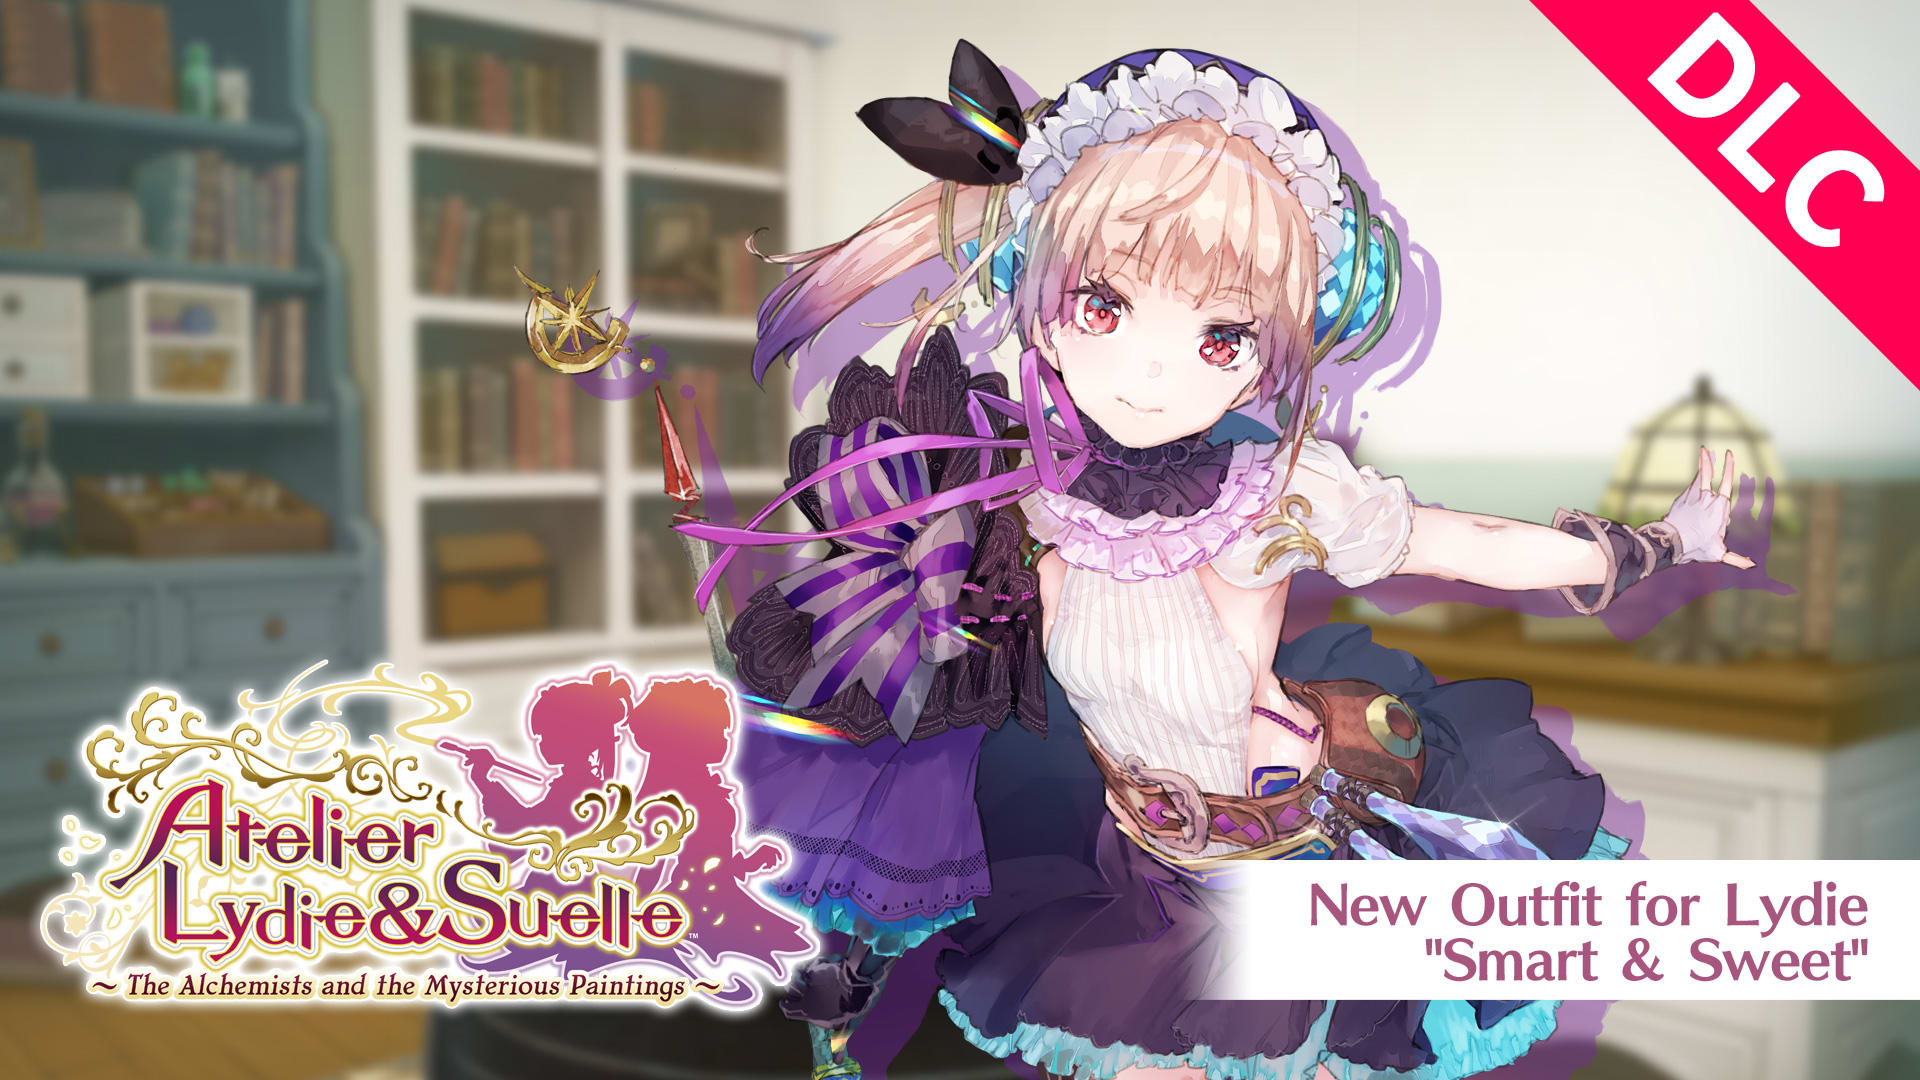 Atelier Lydie & Suelle: New Outfit for Lydie "Smart & Sweet"